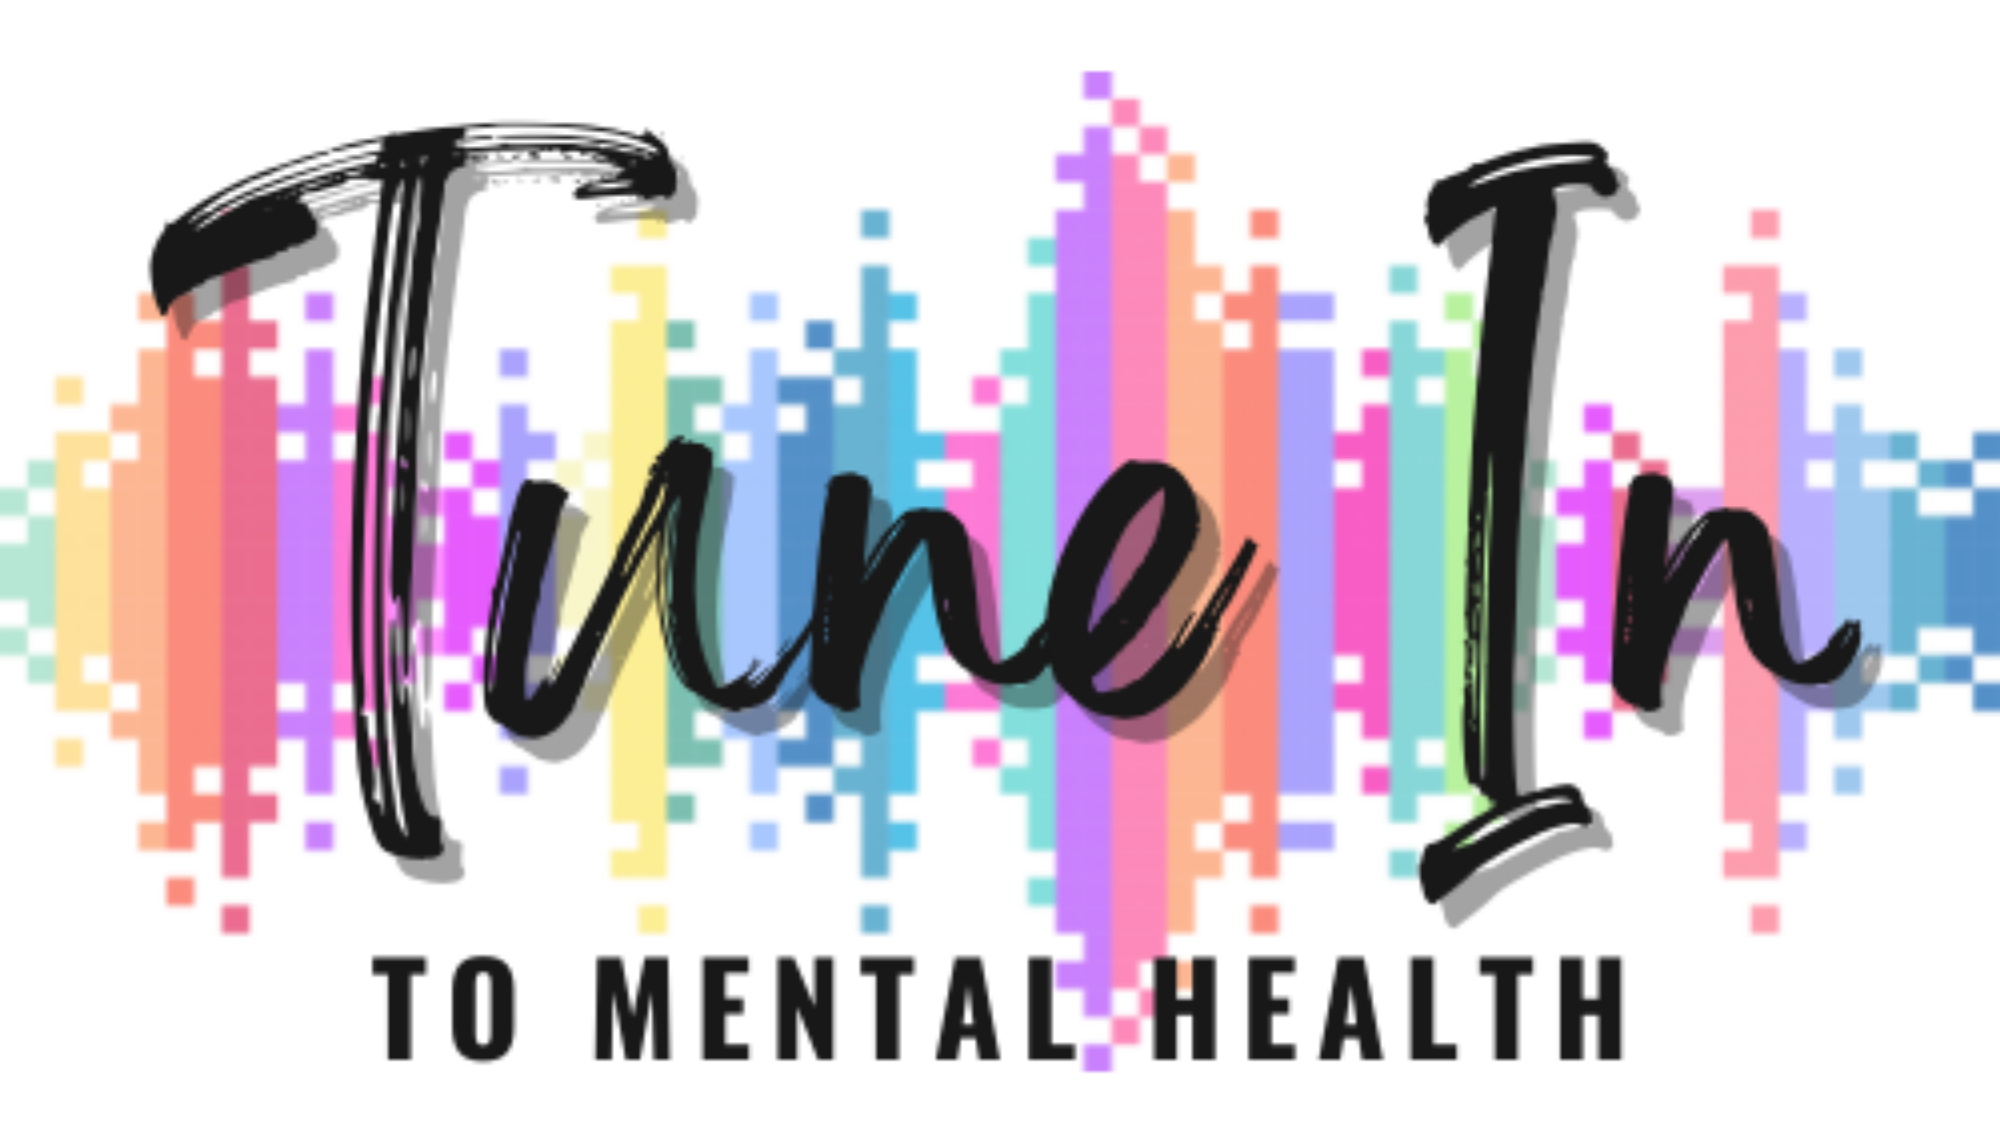 SMA Healthcare Foundation to Feature Jeff Yalden and This Is My Brave – The Show at 7th Annual Who is Jay? Mental Health Symposium